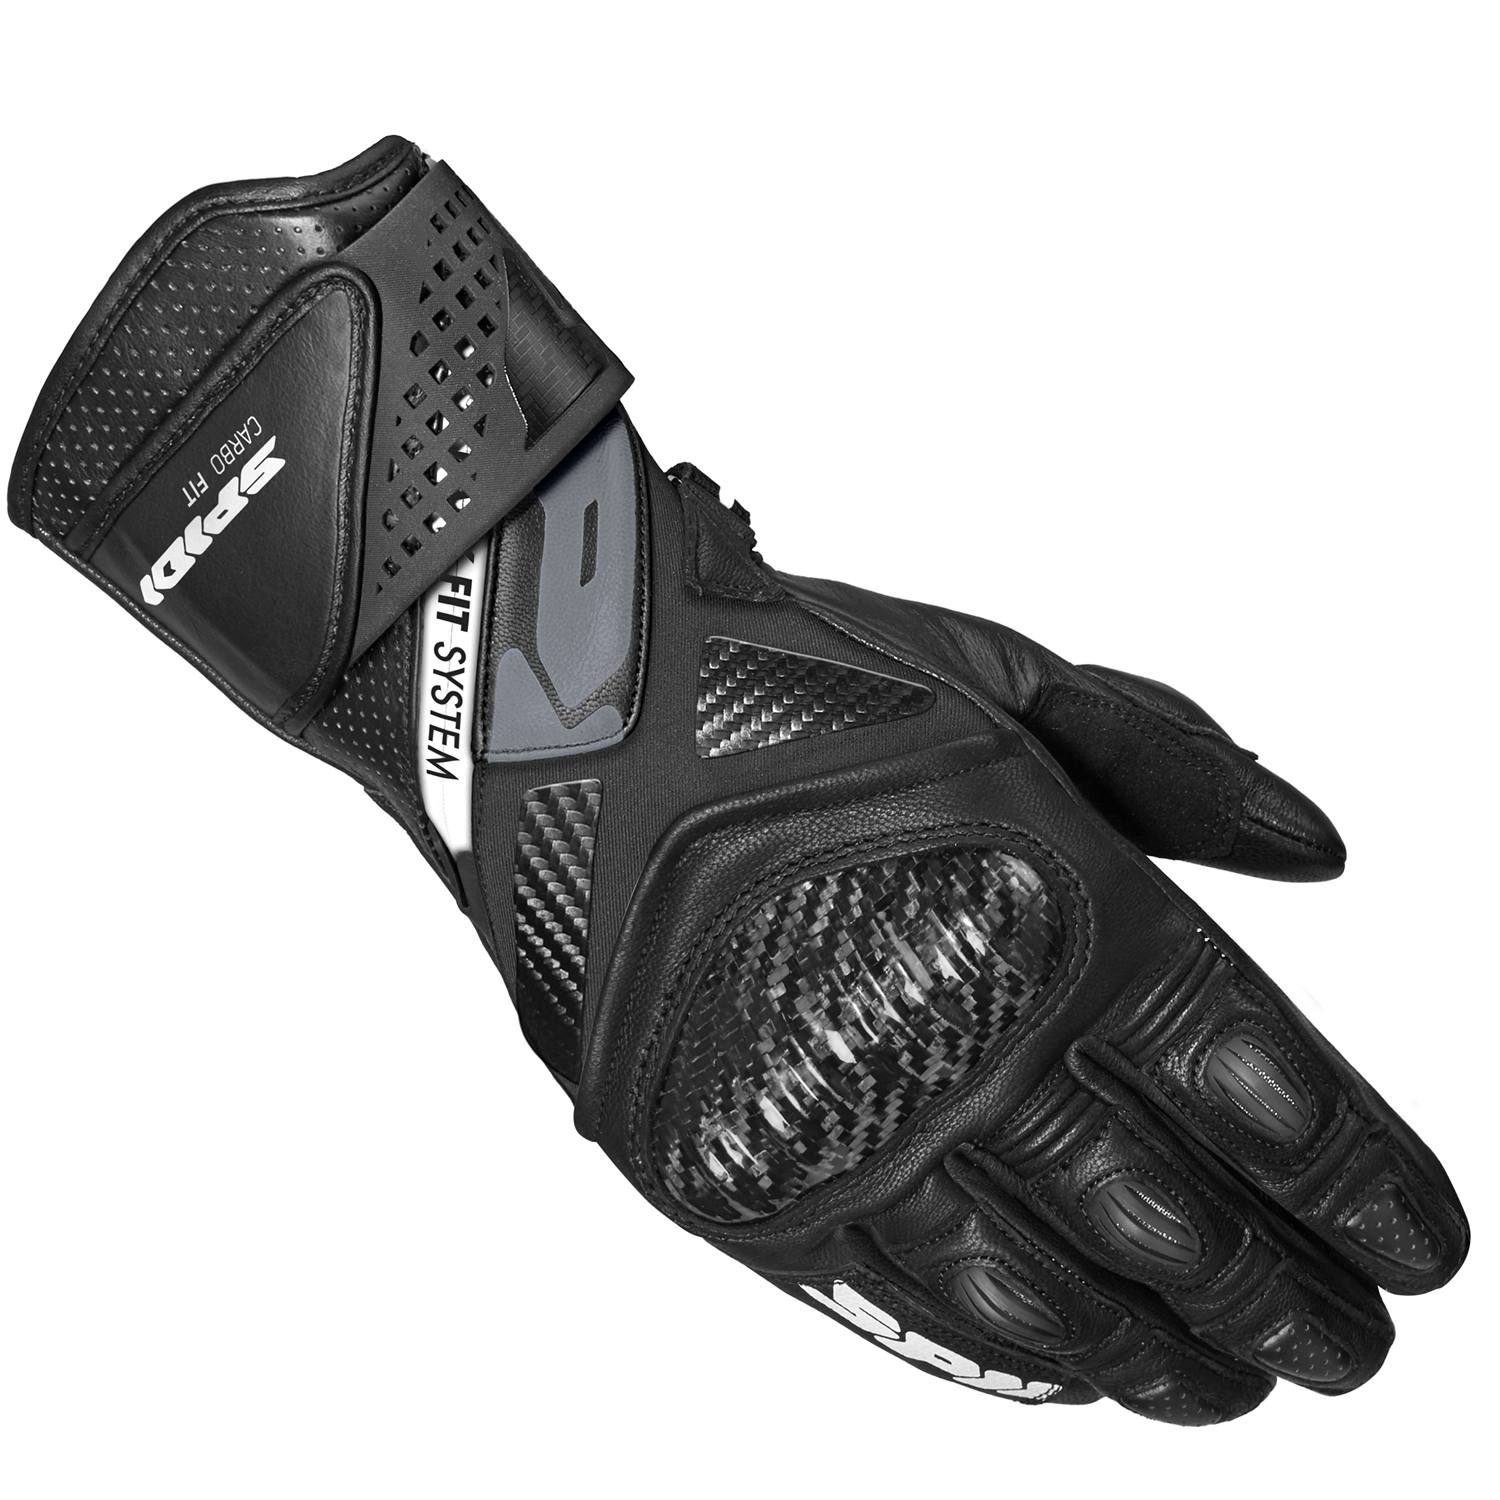 Image of Spidi Carbo Fit Gloves Black Size S ID 8030161481471